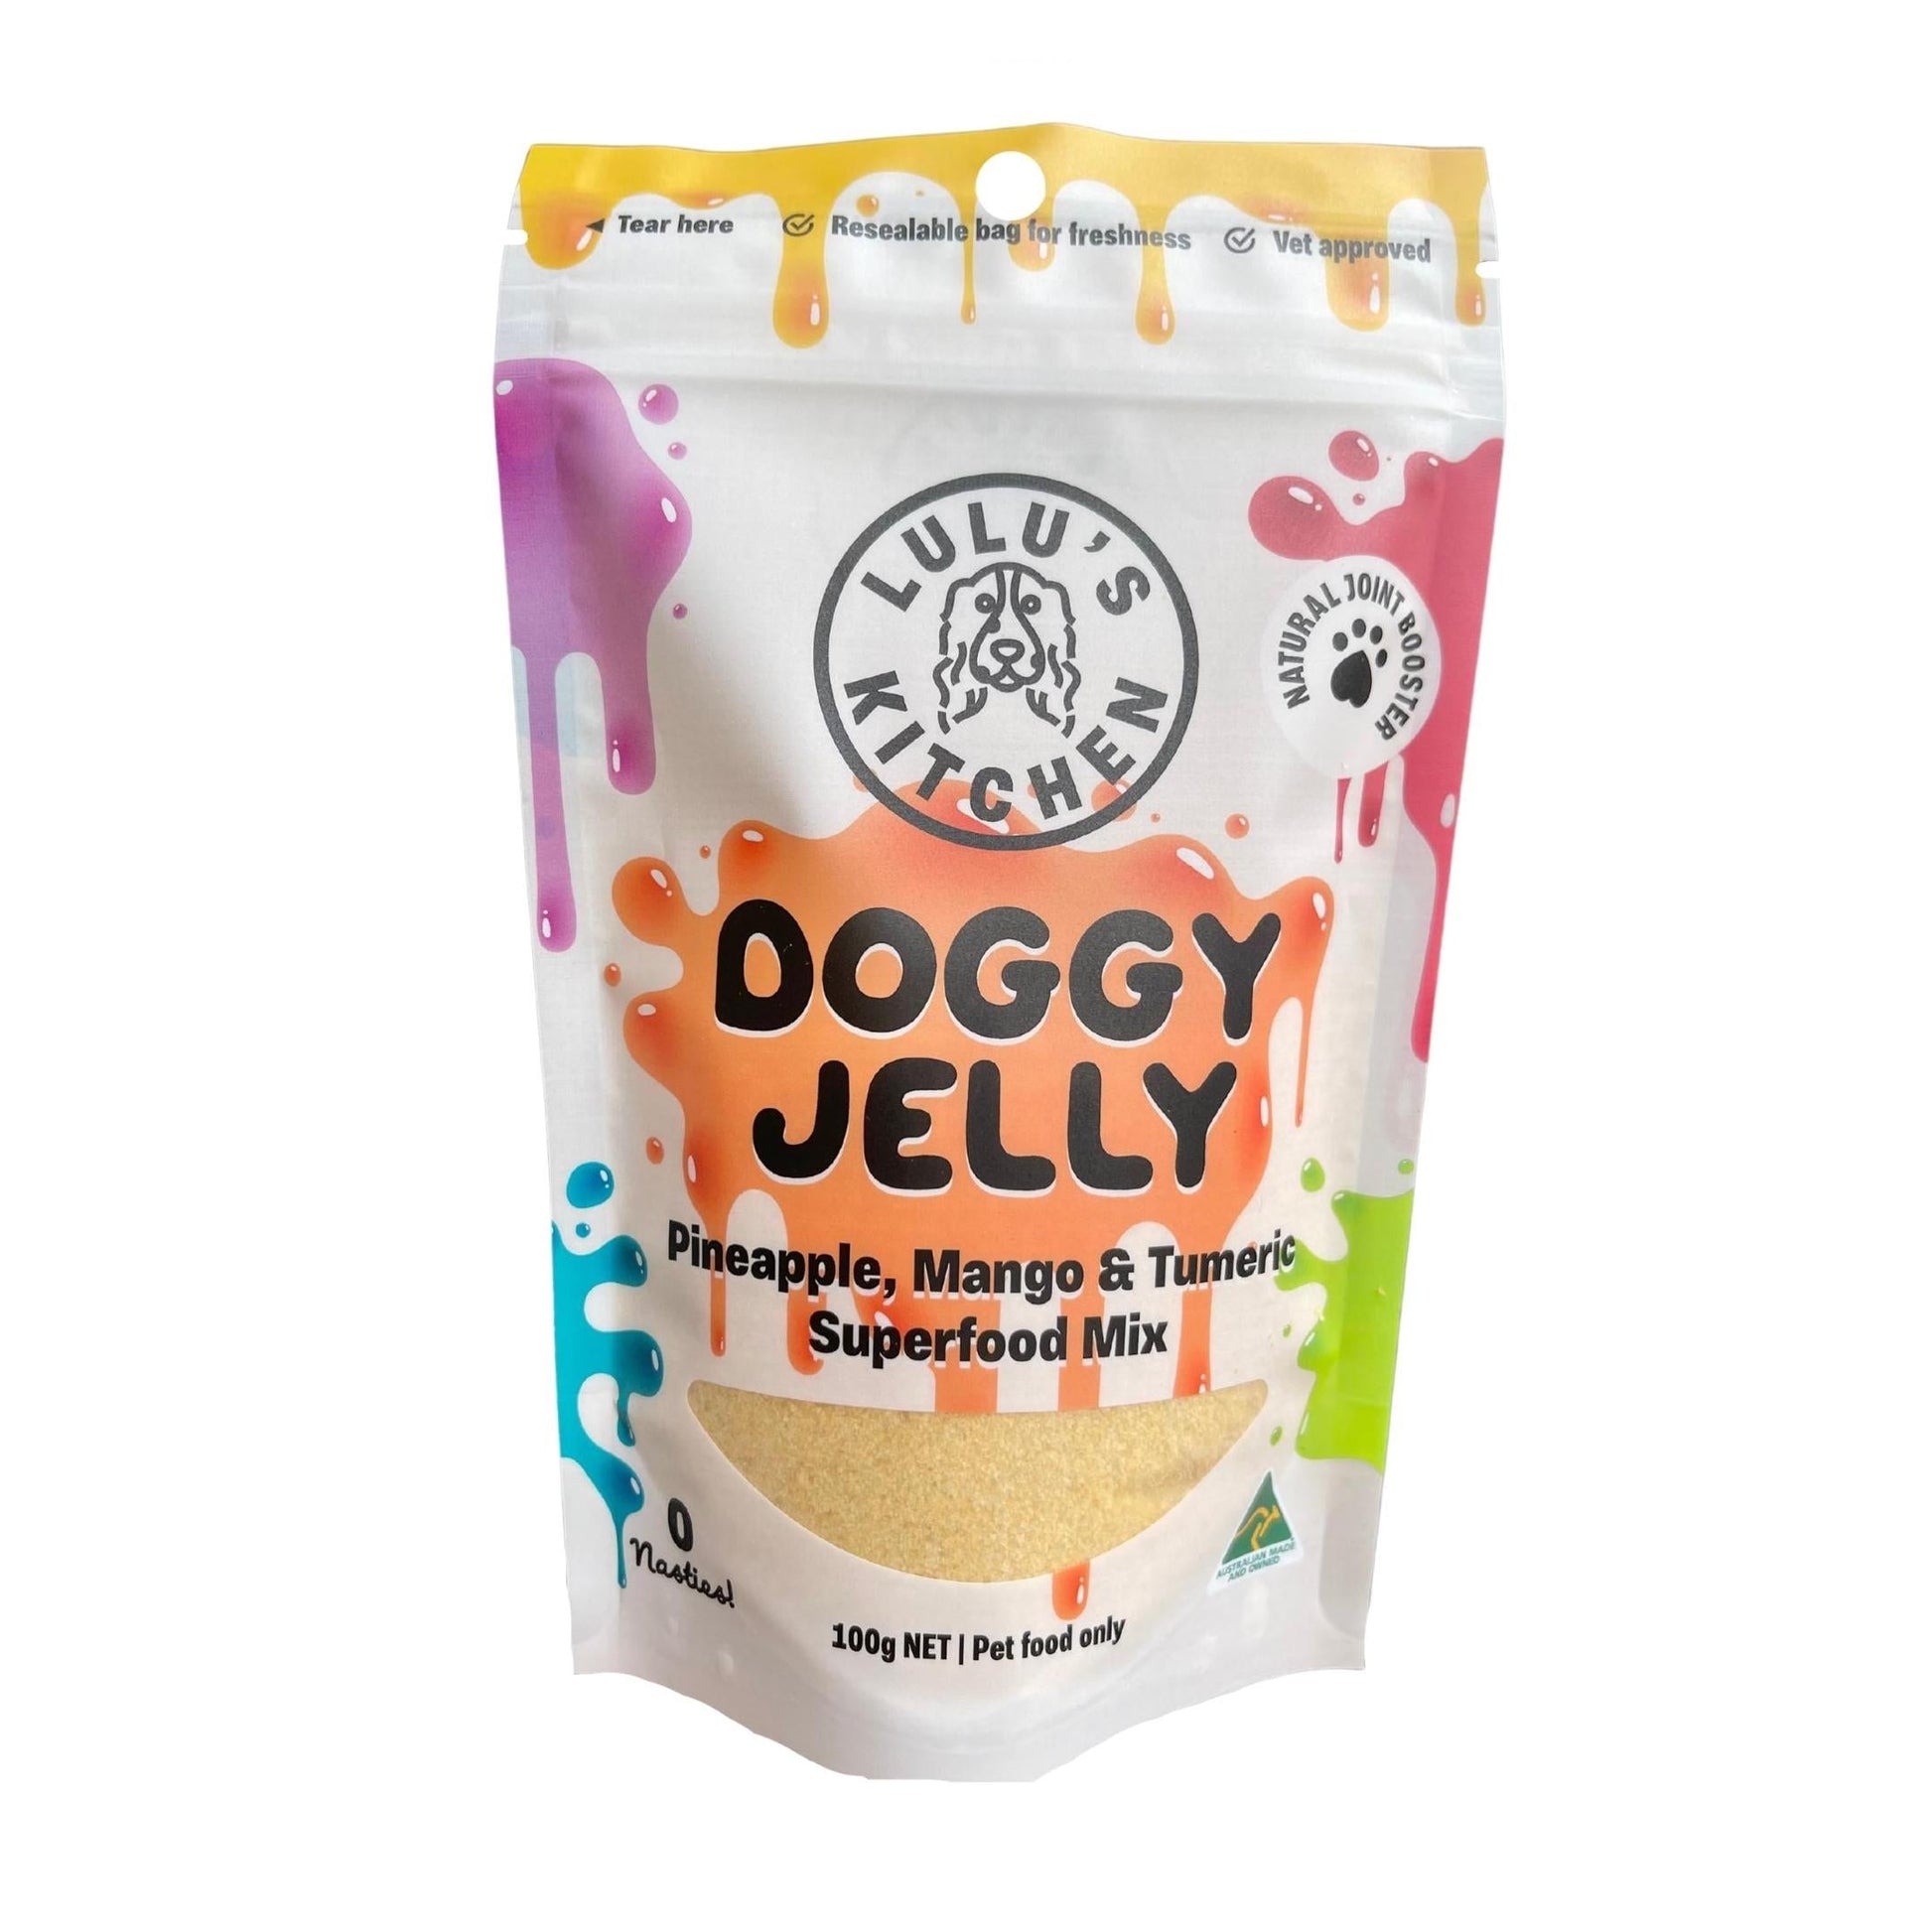 Doggy jelly - jelly for dogs with mango, pineapple and tumeric